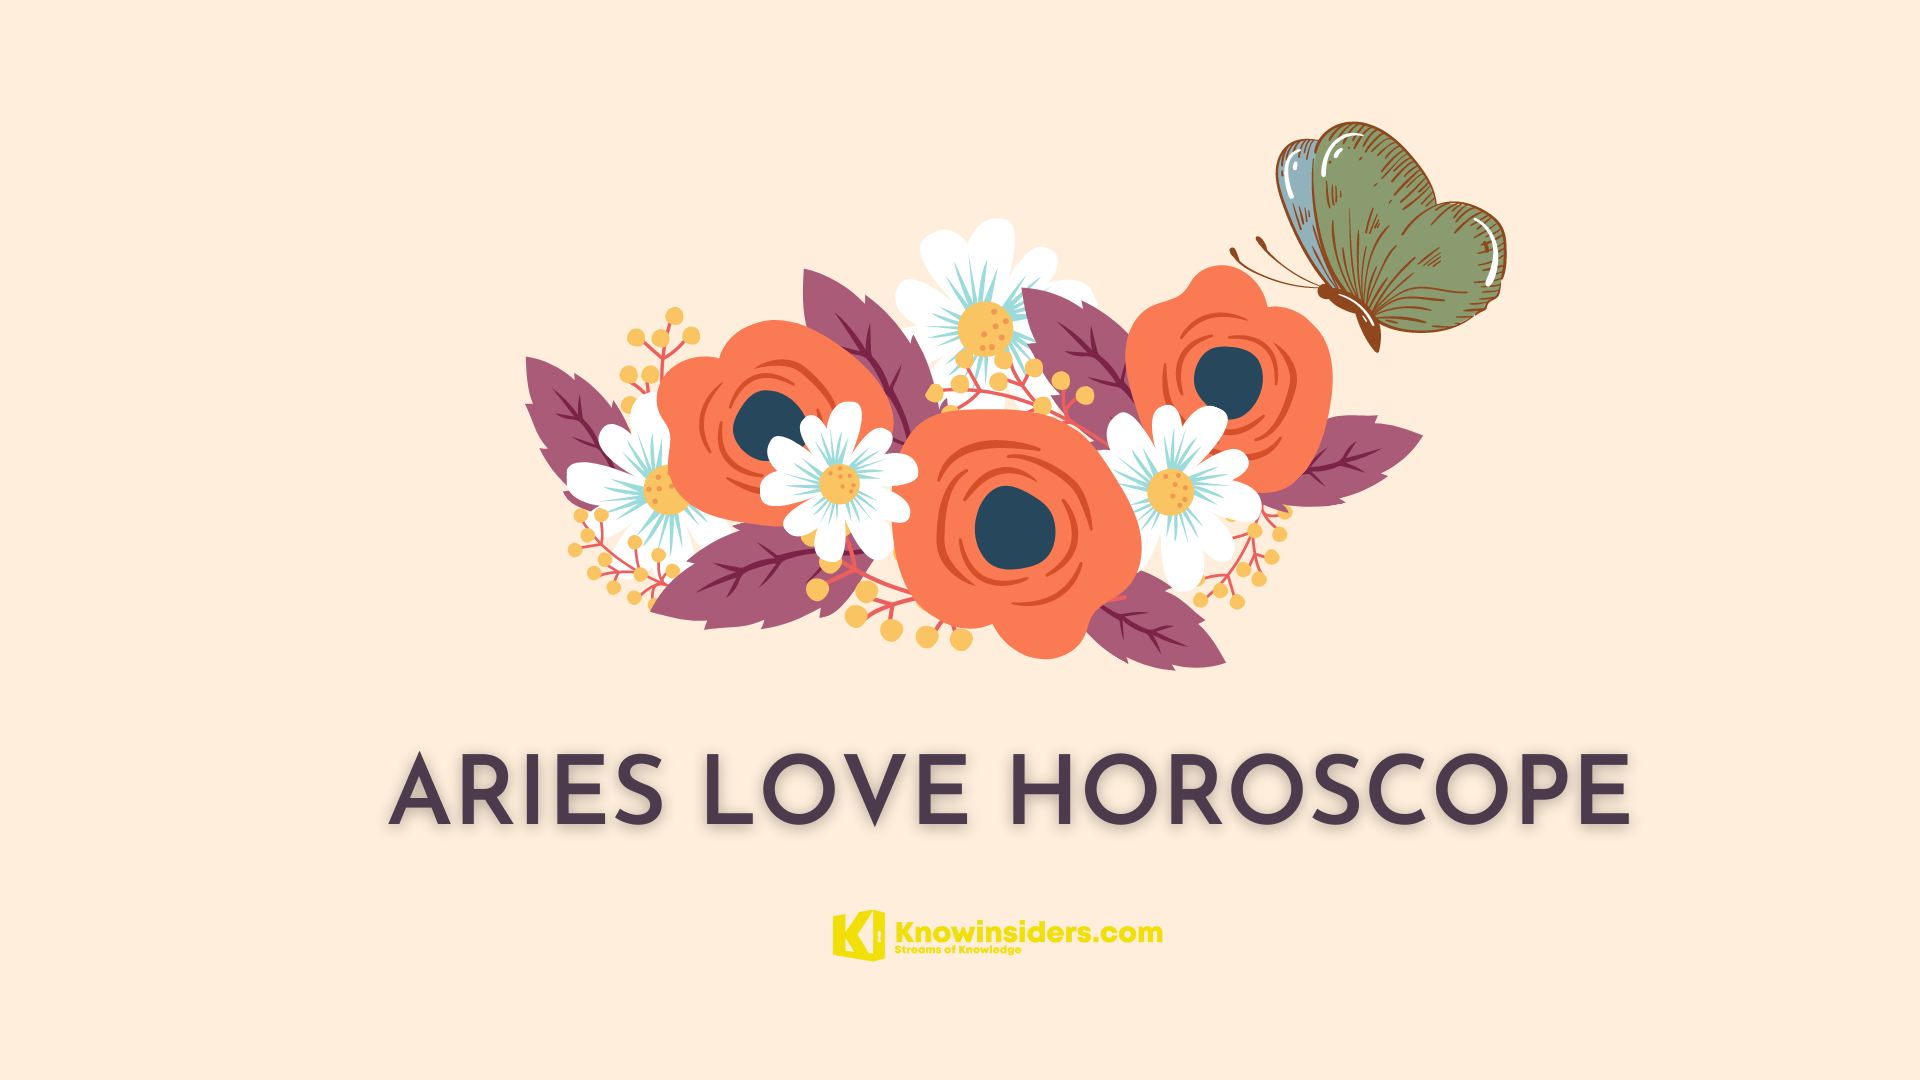 ARIES Horoscope: Astrological Prediction for Love, Relationship of All Life